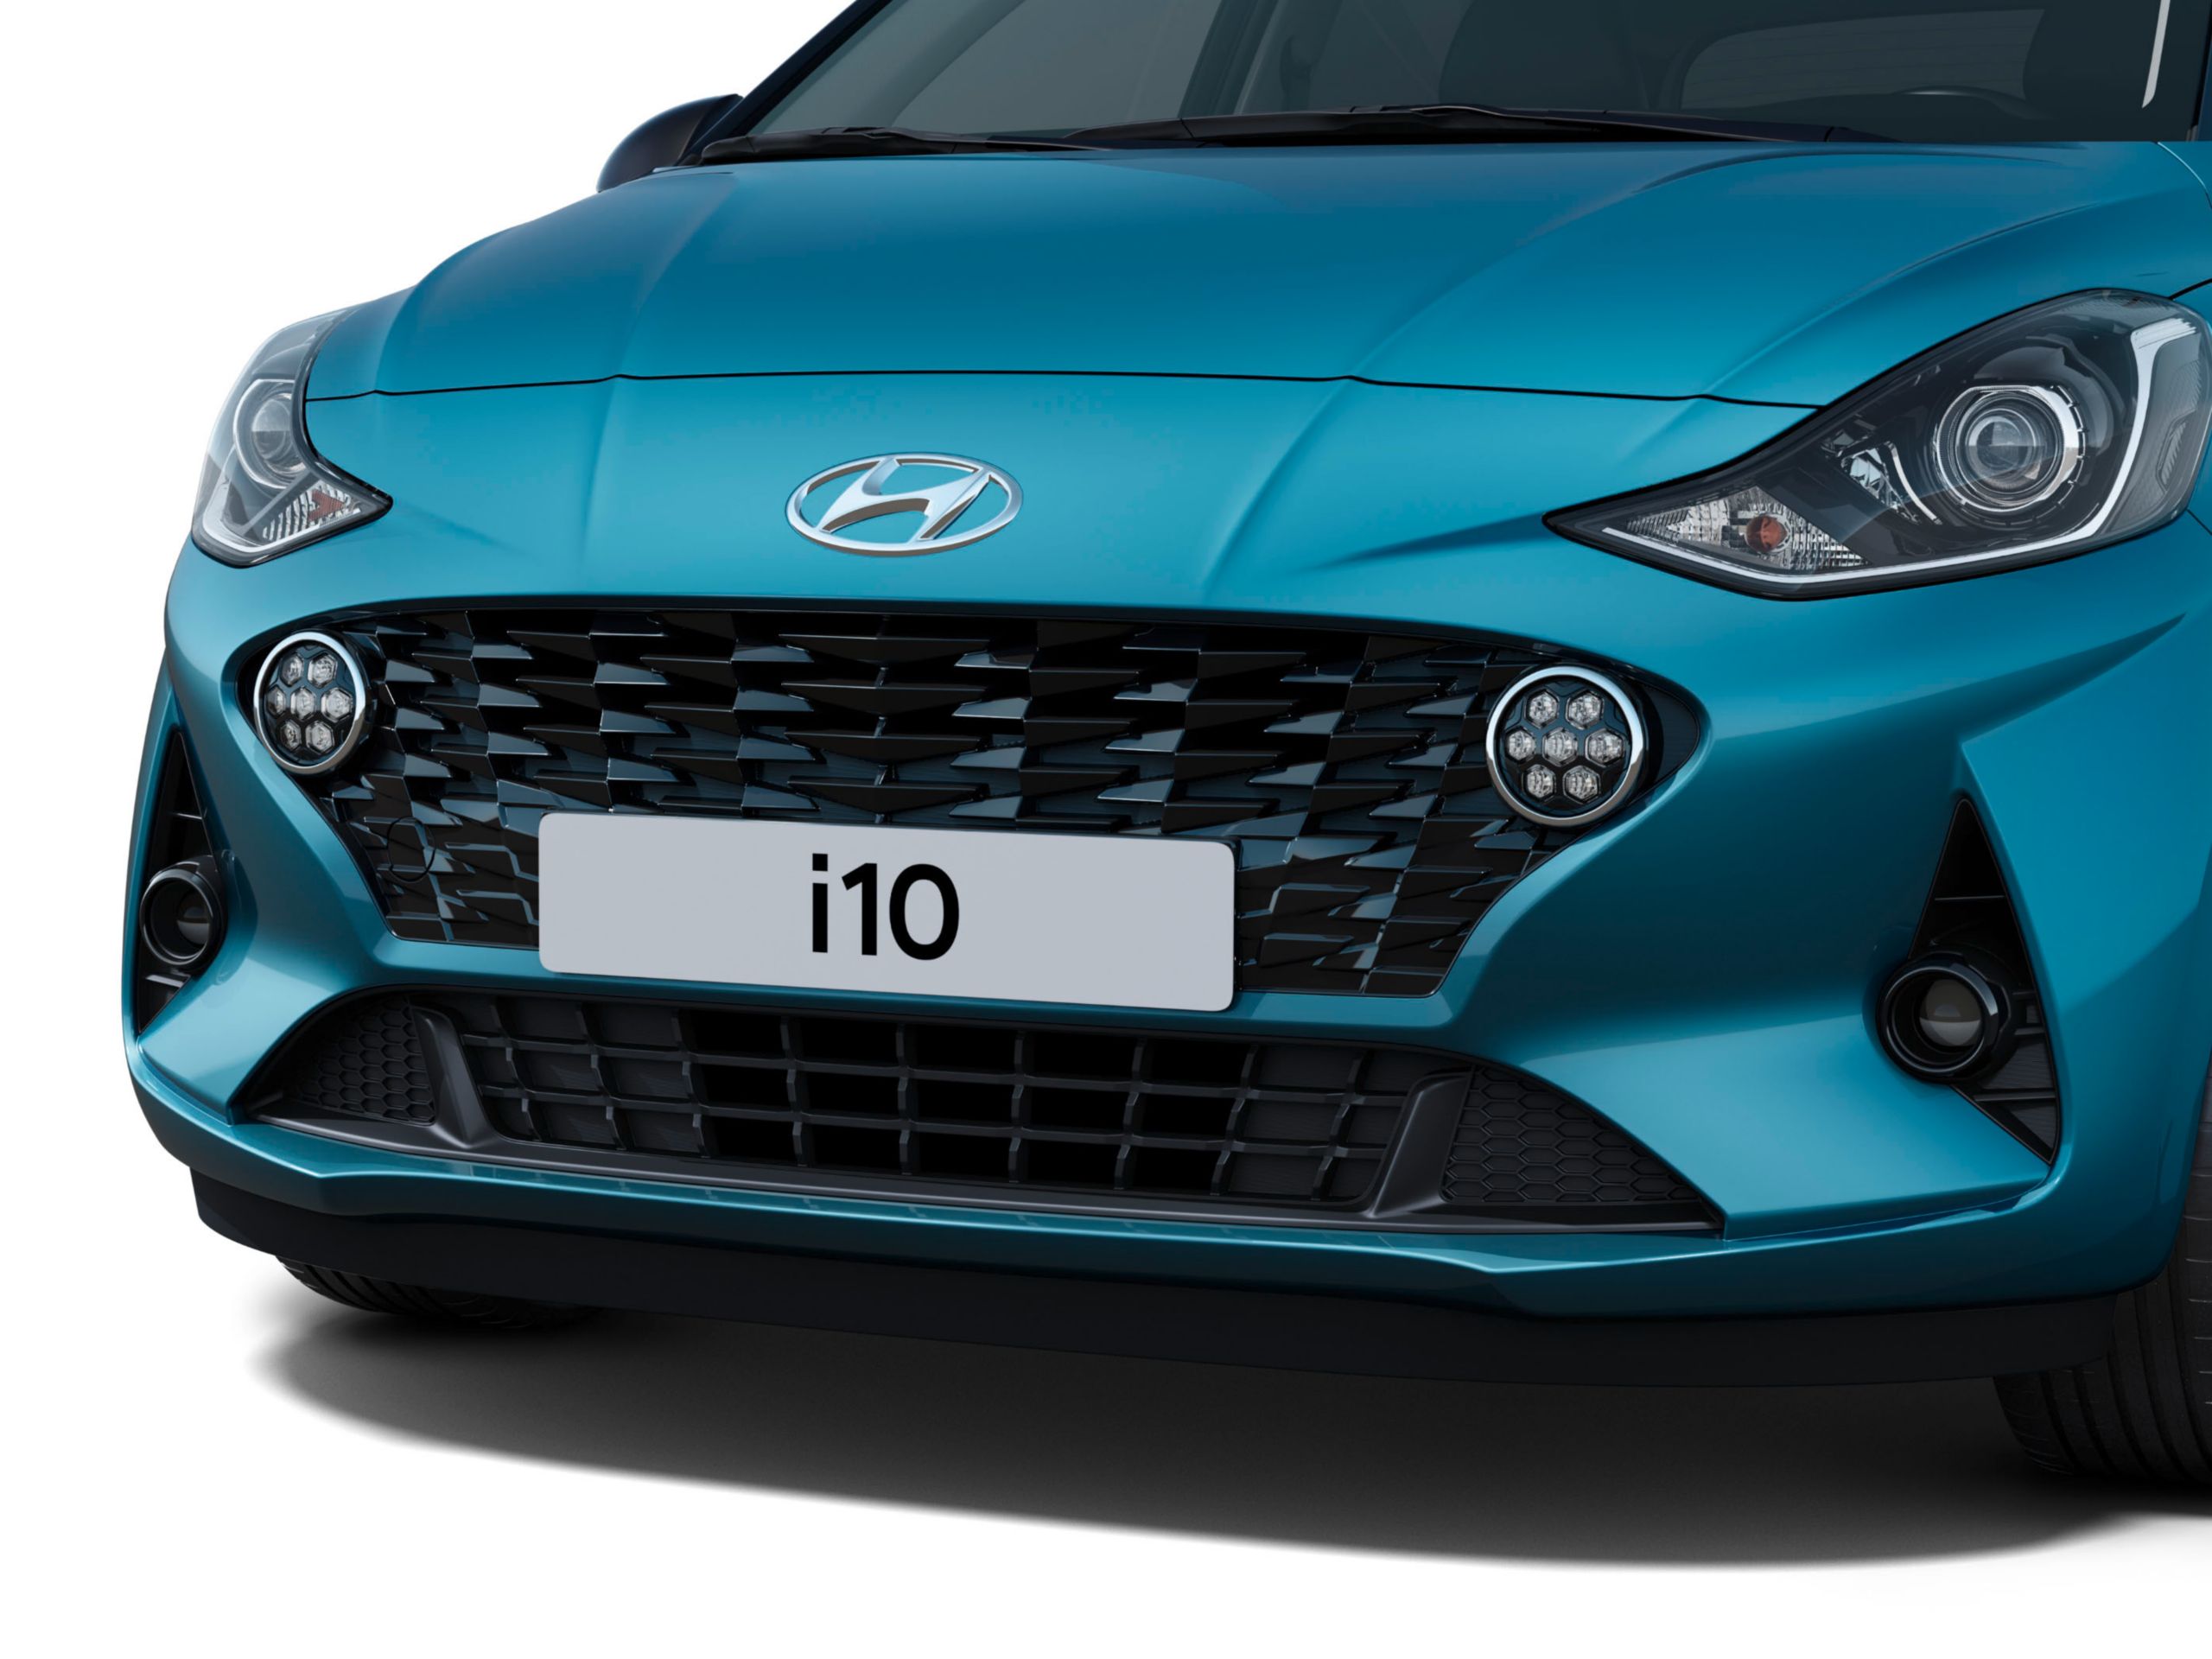 The Hyundai i10 in Aqua Turquoise Metallic from the front with its new bold grille.